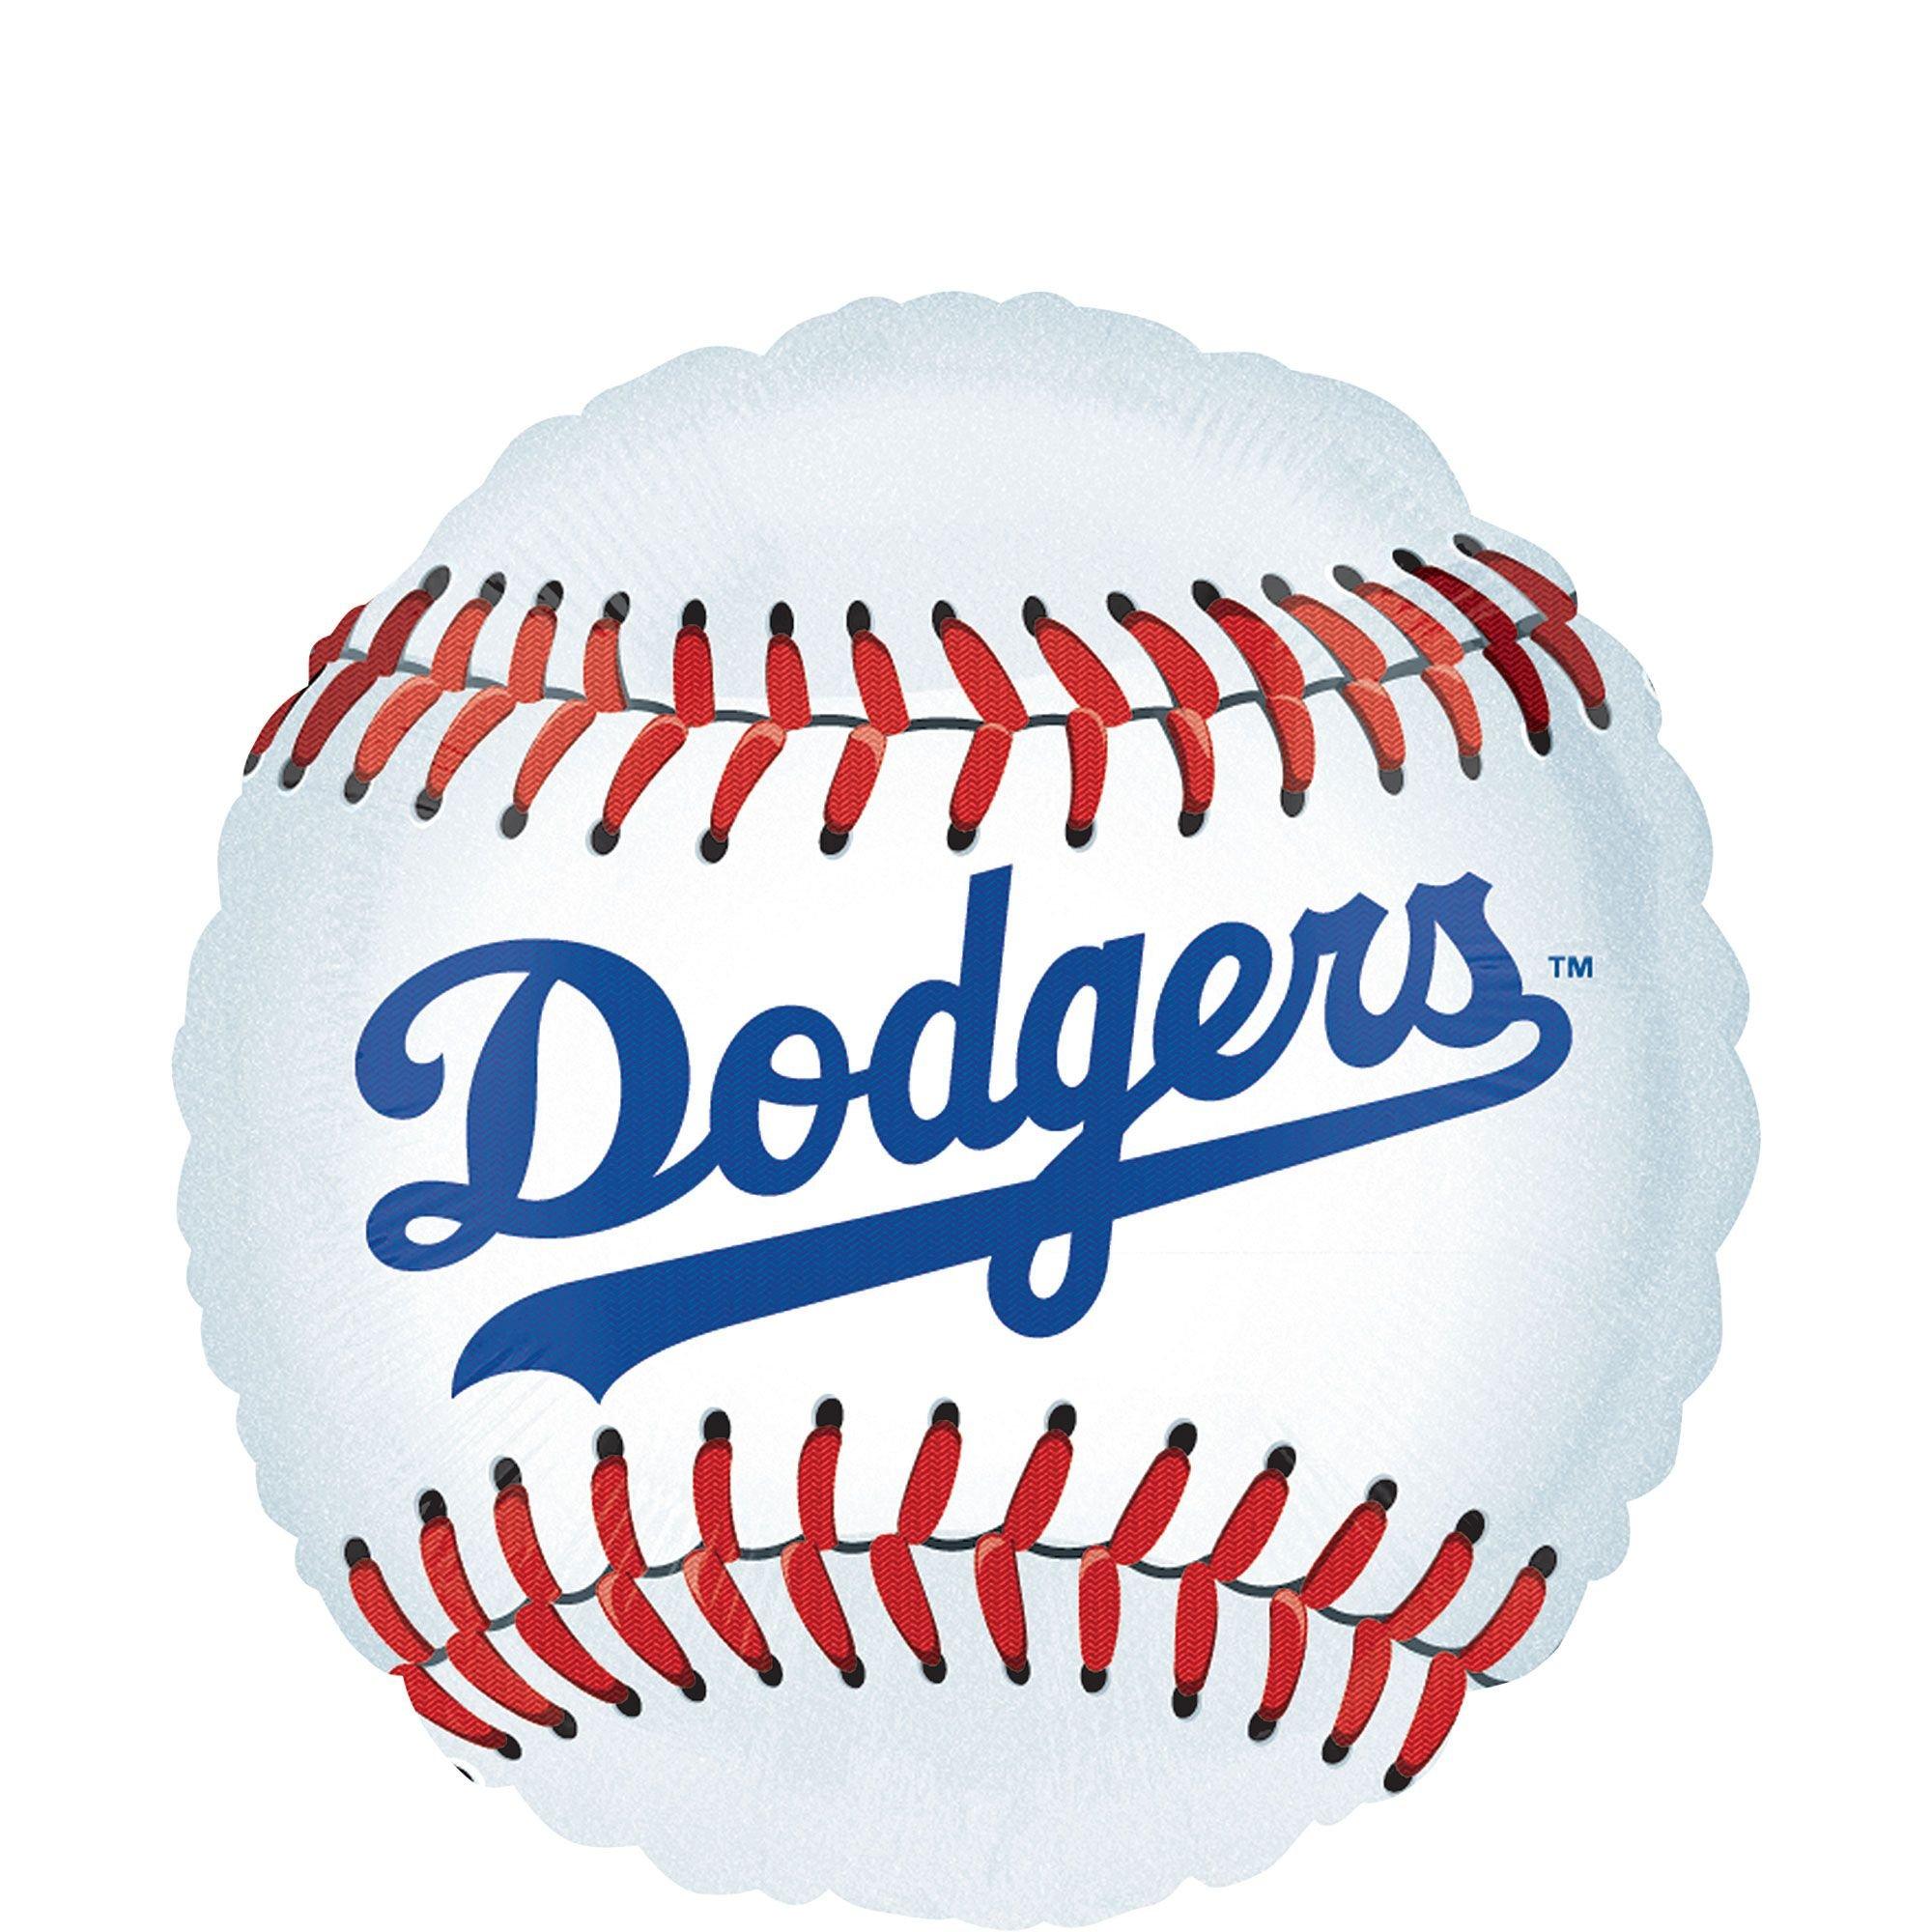 Los Angeles Dodgers on X: Custom wallpapers are back! Send us a